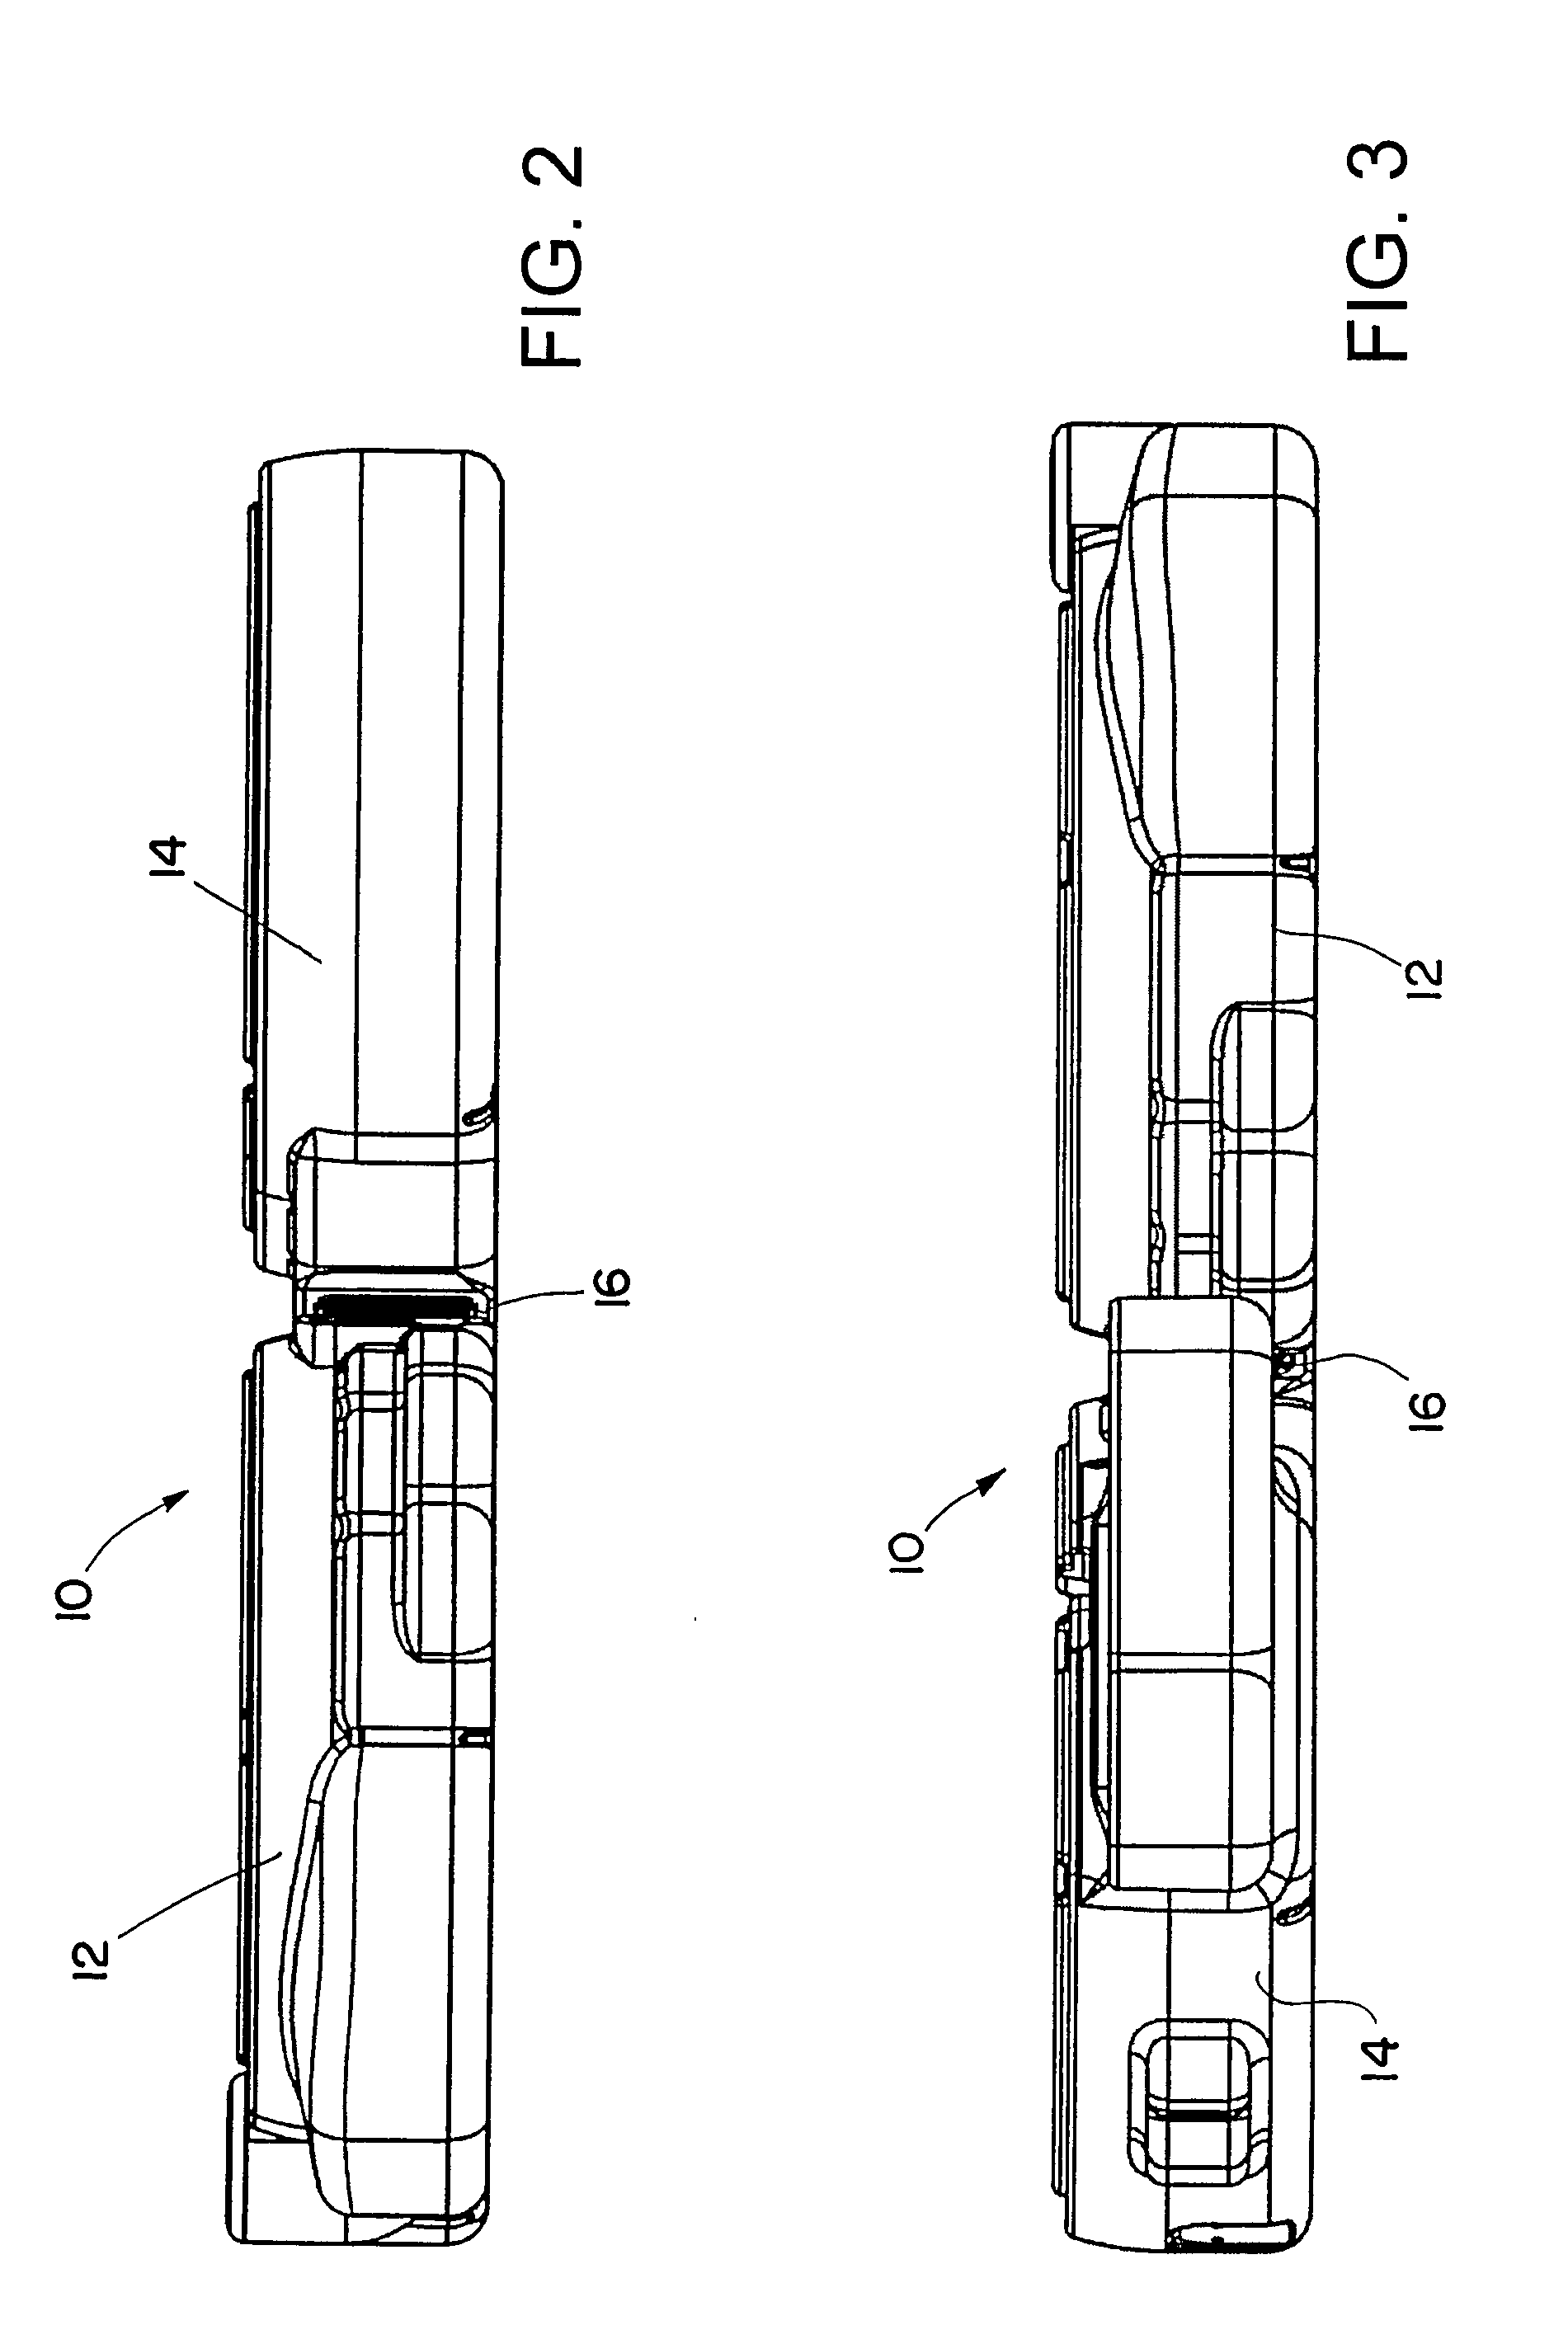 Rotational molding process and product using separation sheet